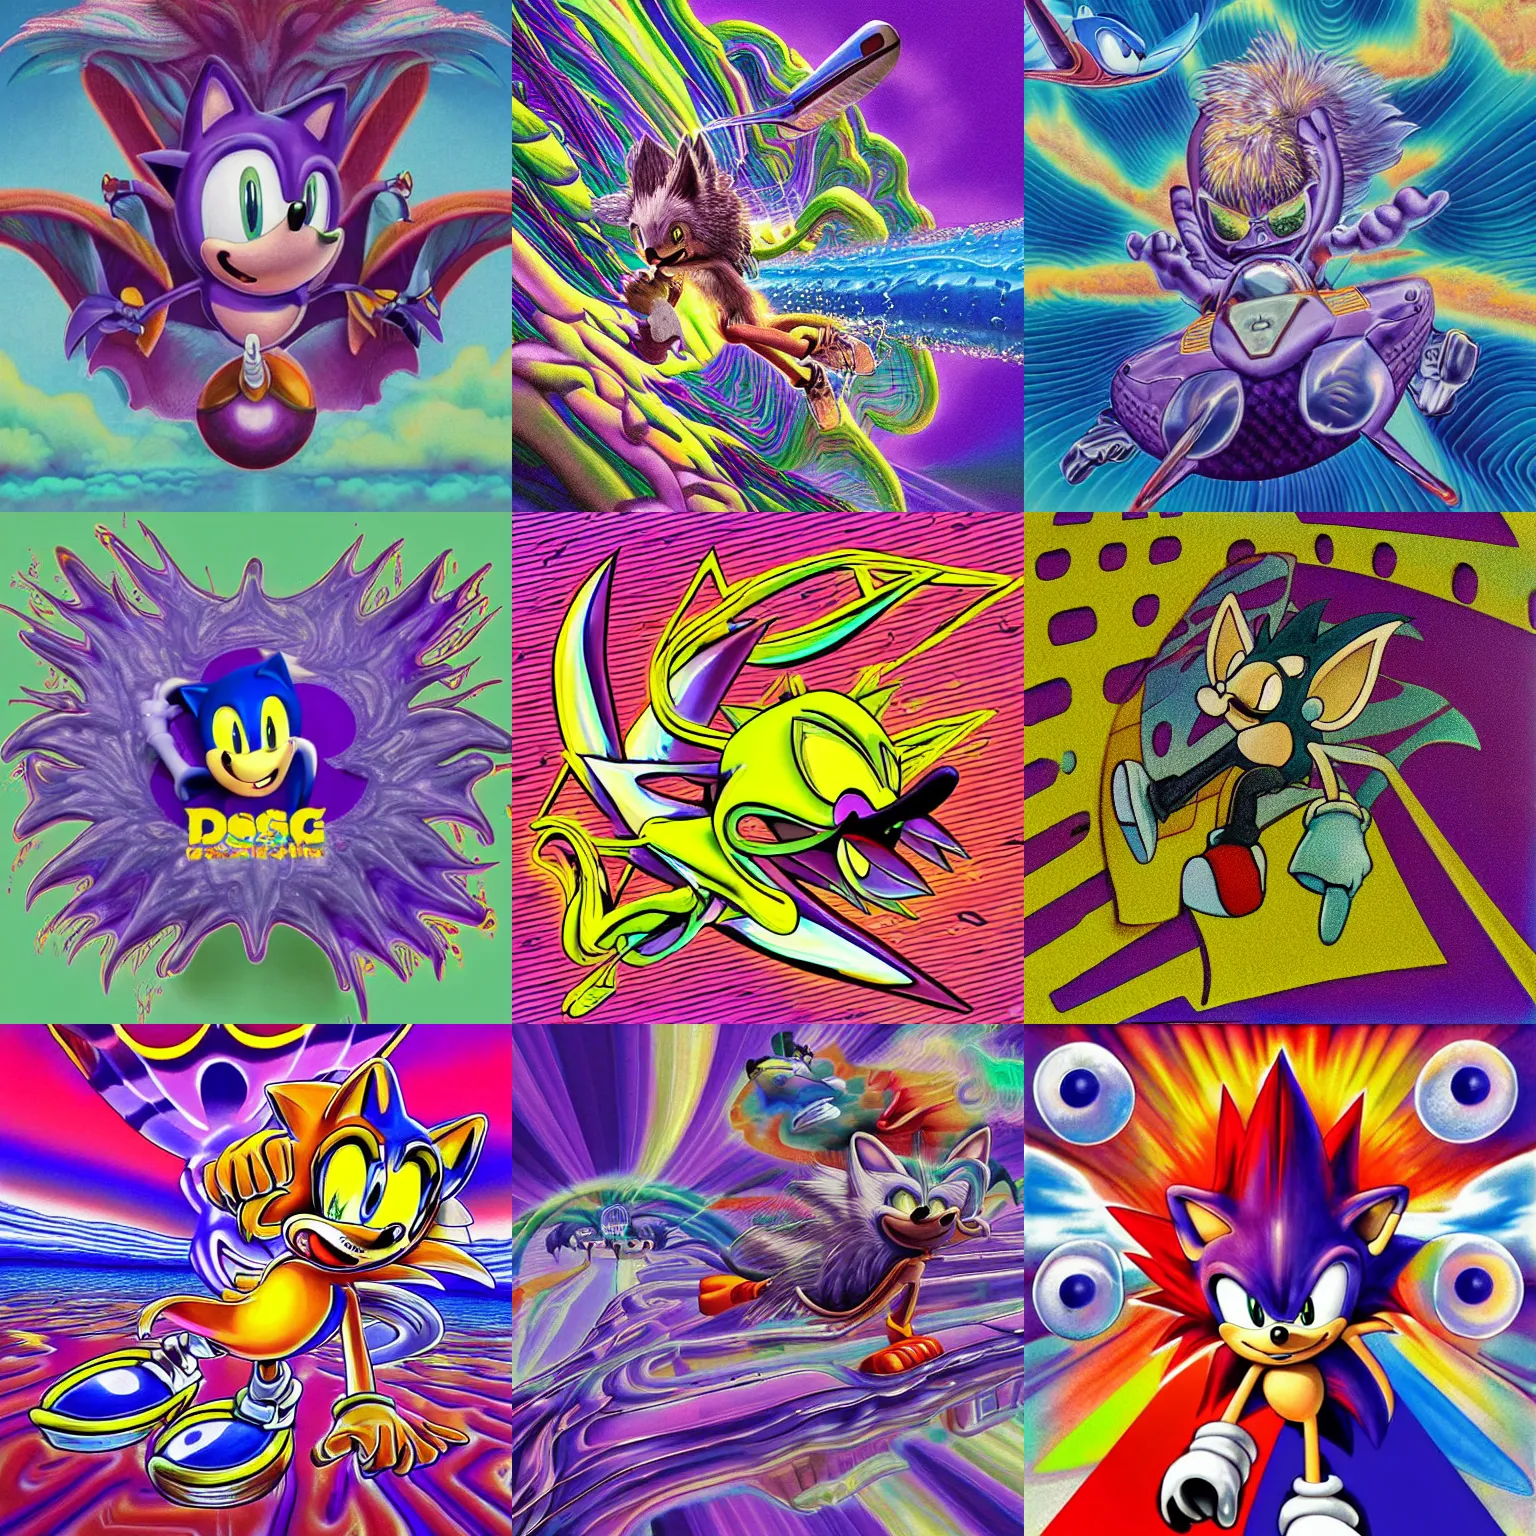 Prompt: surreal, faded, detailed professional, high quality airbrush art MGMT album cover of a liquid dissolving LSD DMT sonic the hedgehog on a flat purple checkerboard plane, Pacific Coast surfing 1990s 1992 prerendered graphics raytraced phong shaded album cover